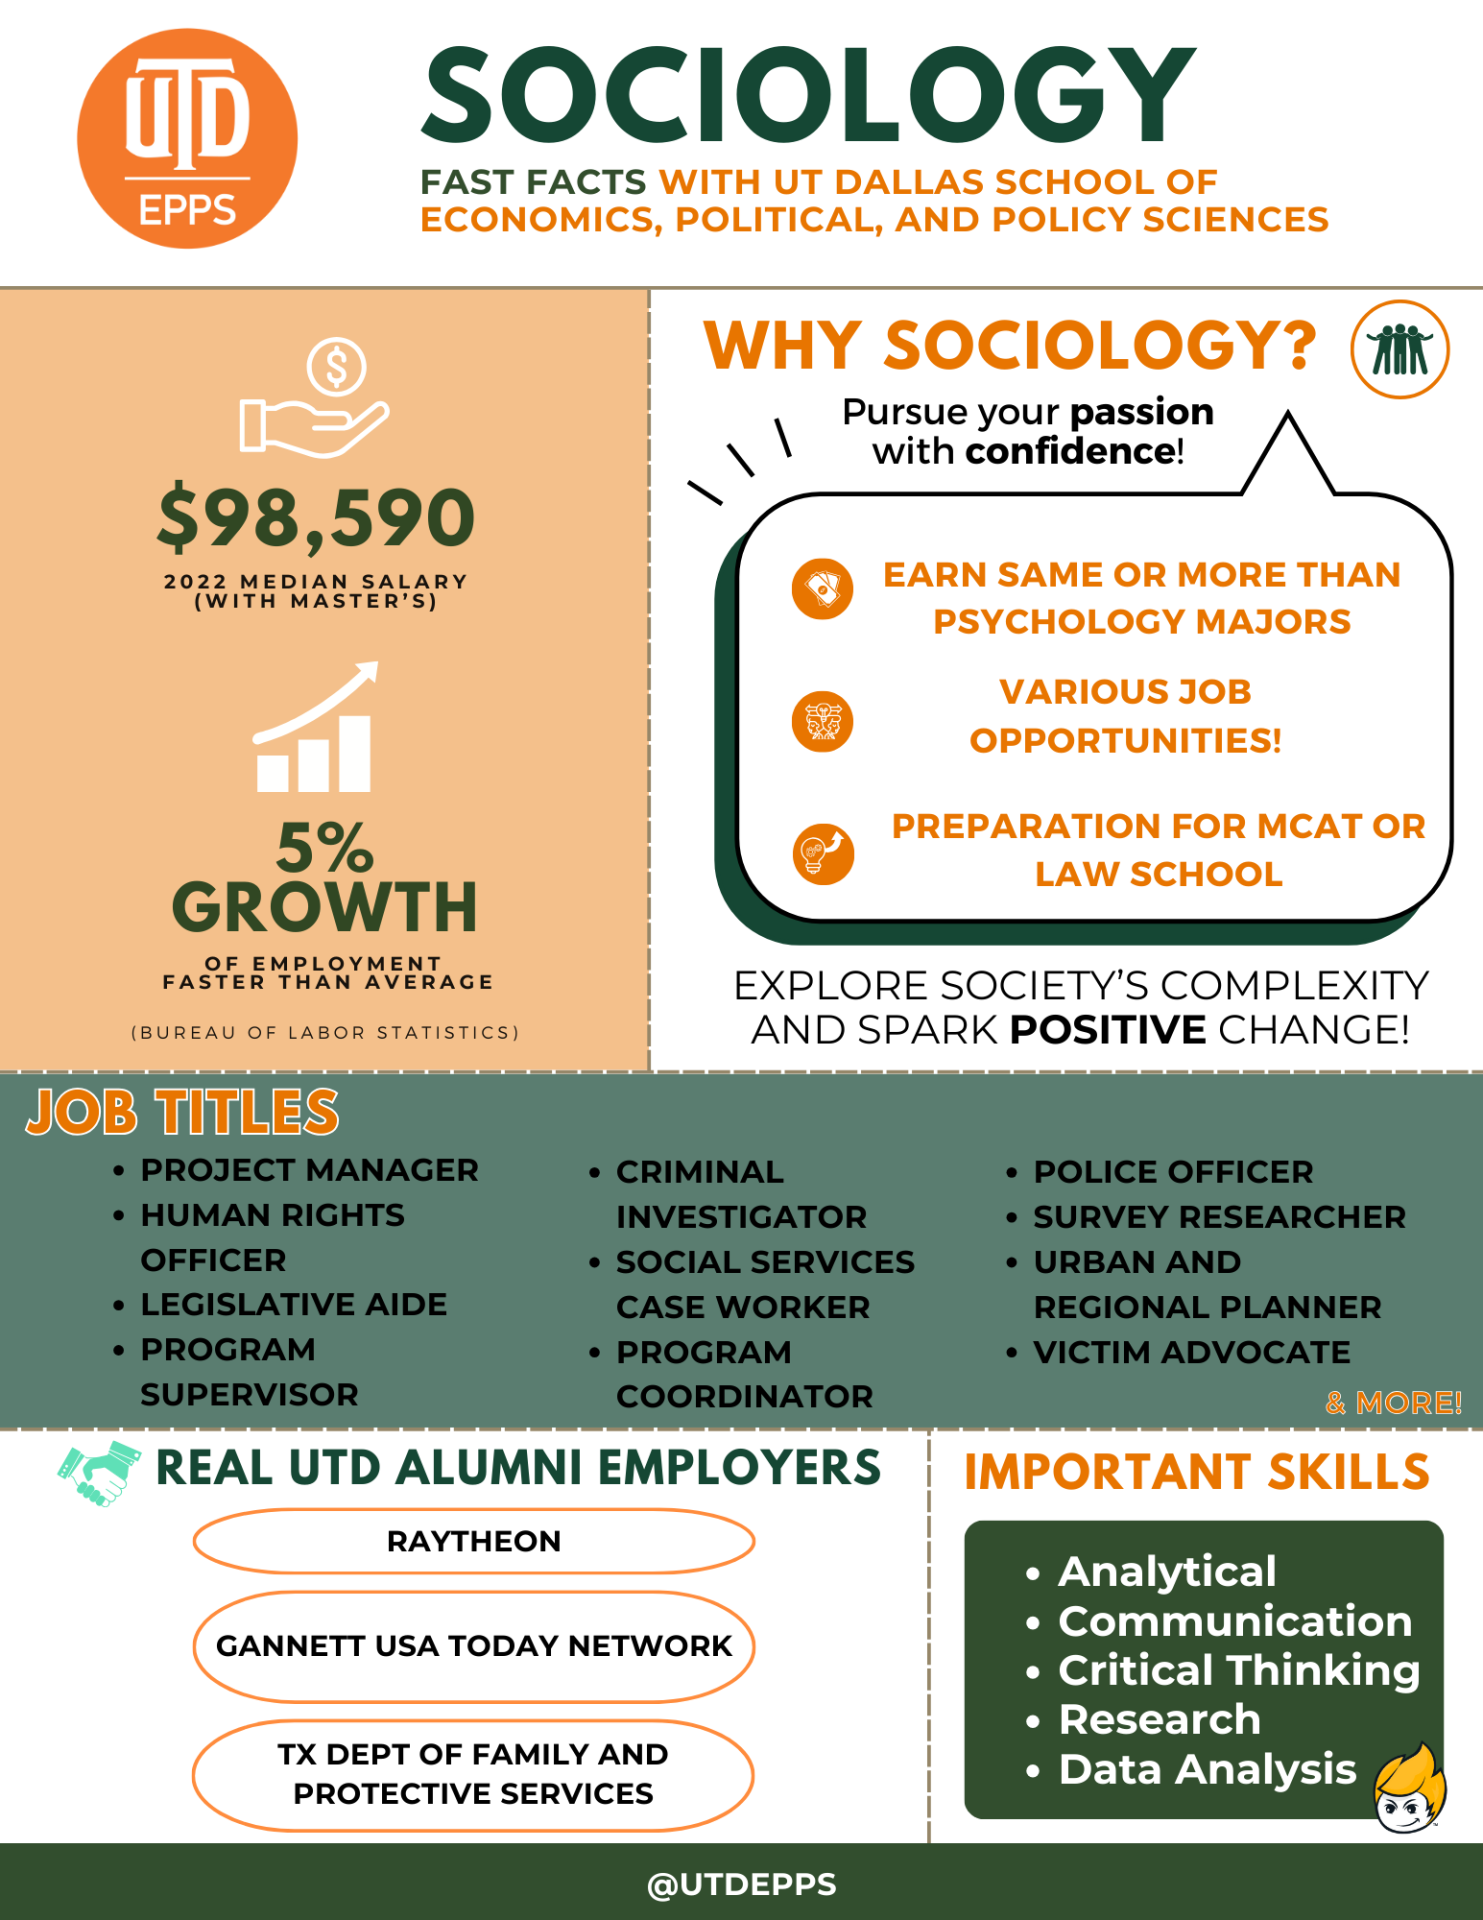 Sociology. Fast Facts with Ut Dallas school of economics, political, and policy sciences. 

,590 is the 2022 median salary 
(with master’s). 5% Growth
of employment which is faster than average. Data is from Bureau of Labor Statistics. 

WHY sociology? Pursue your passion 
with confidence!
EARN SAME OR MORE THAN PSYCHOLOGY MAJORS.
VARIOUS JOB OPPORTUNITIES!
PREPARATION FOR MCAT OR LAW SCHOOL.
EXPLORE SOCIETY’S COMPLEXITY AND SPARK POSITIVE CHANGE!

Job Titles include: PROJECT MANAGER
HUMAN RIGHTS OFFICER
LEGISLATIVE AIDE
PROGRAM SUPERVISOR
CRIMINAL INVESTIGATOR
SOCIAL SERVICES CASE WORKER
PROGRAM COORDINATOR
POLICE OFFICER
SURVEY RESEARCHER
URBAN AND REGIONAL PLANNER
VICTIM ADVOCATE
& MORE!

Real UTD Alumni employers include:
RAYTHEON
GANNETT USA TODAY NETWORK
TX DEPT OF FAMILY AND PROTECTIVE SERVICES
real utd alumni employers

Important skills include:
Analytical
Communication
Critical Thinking
Research
Data Analysis

@UTDEPPS
